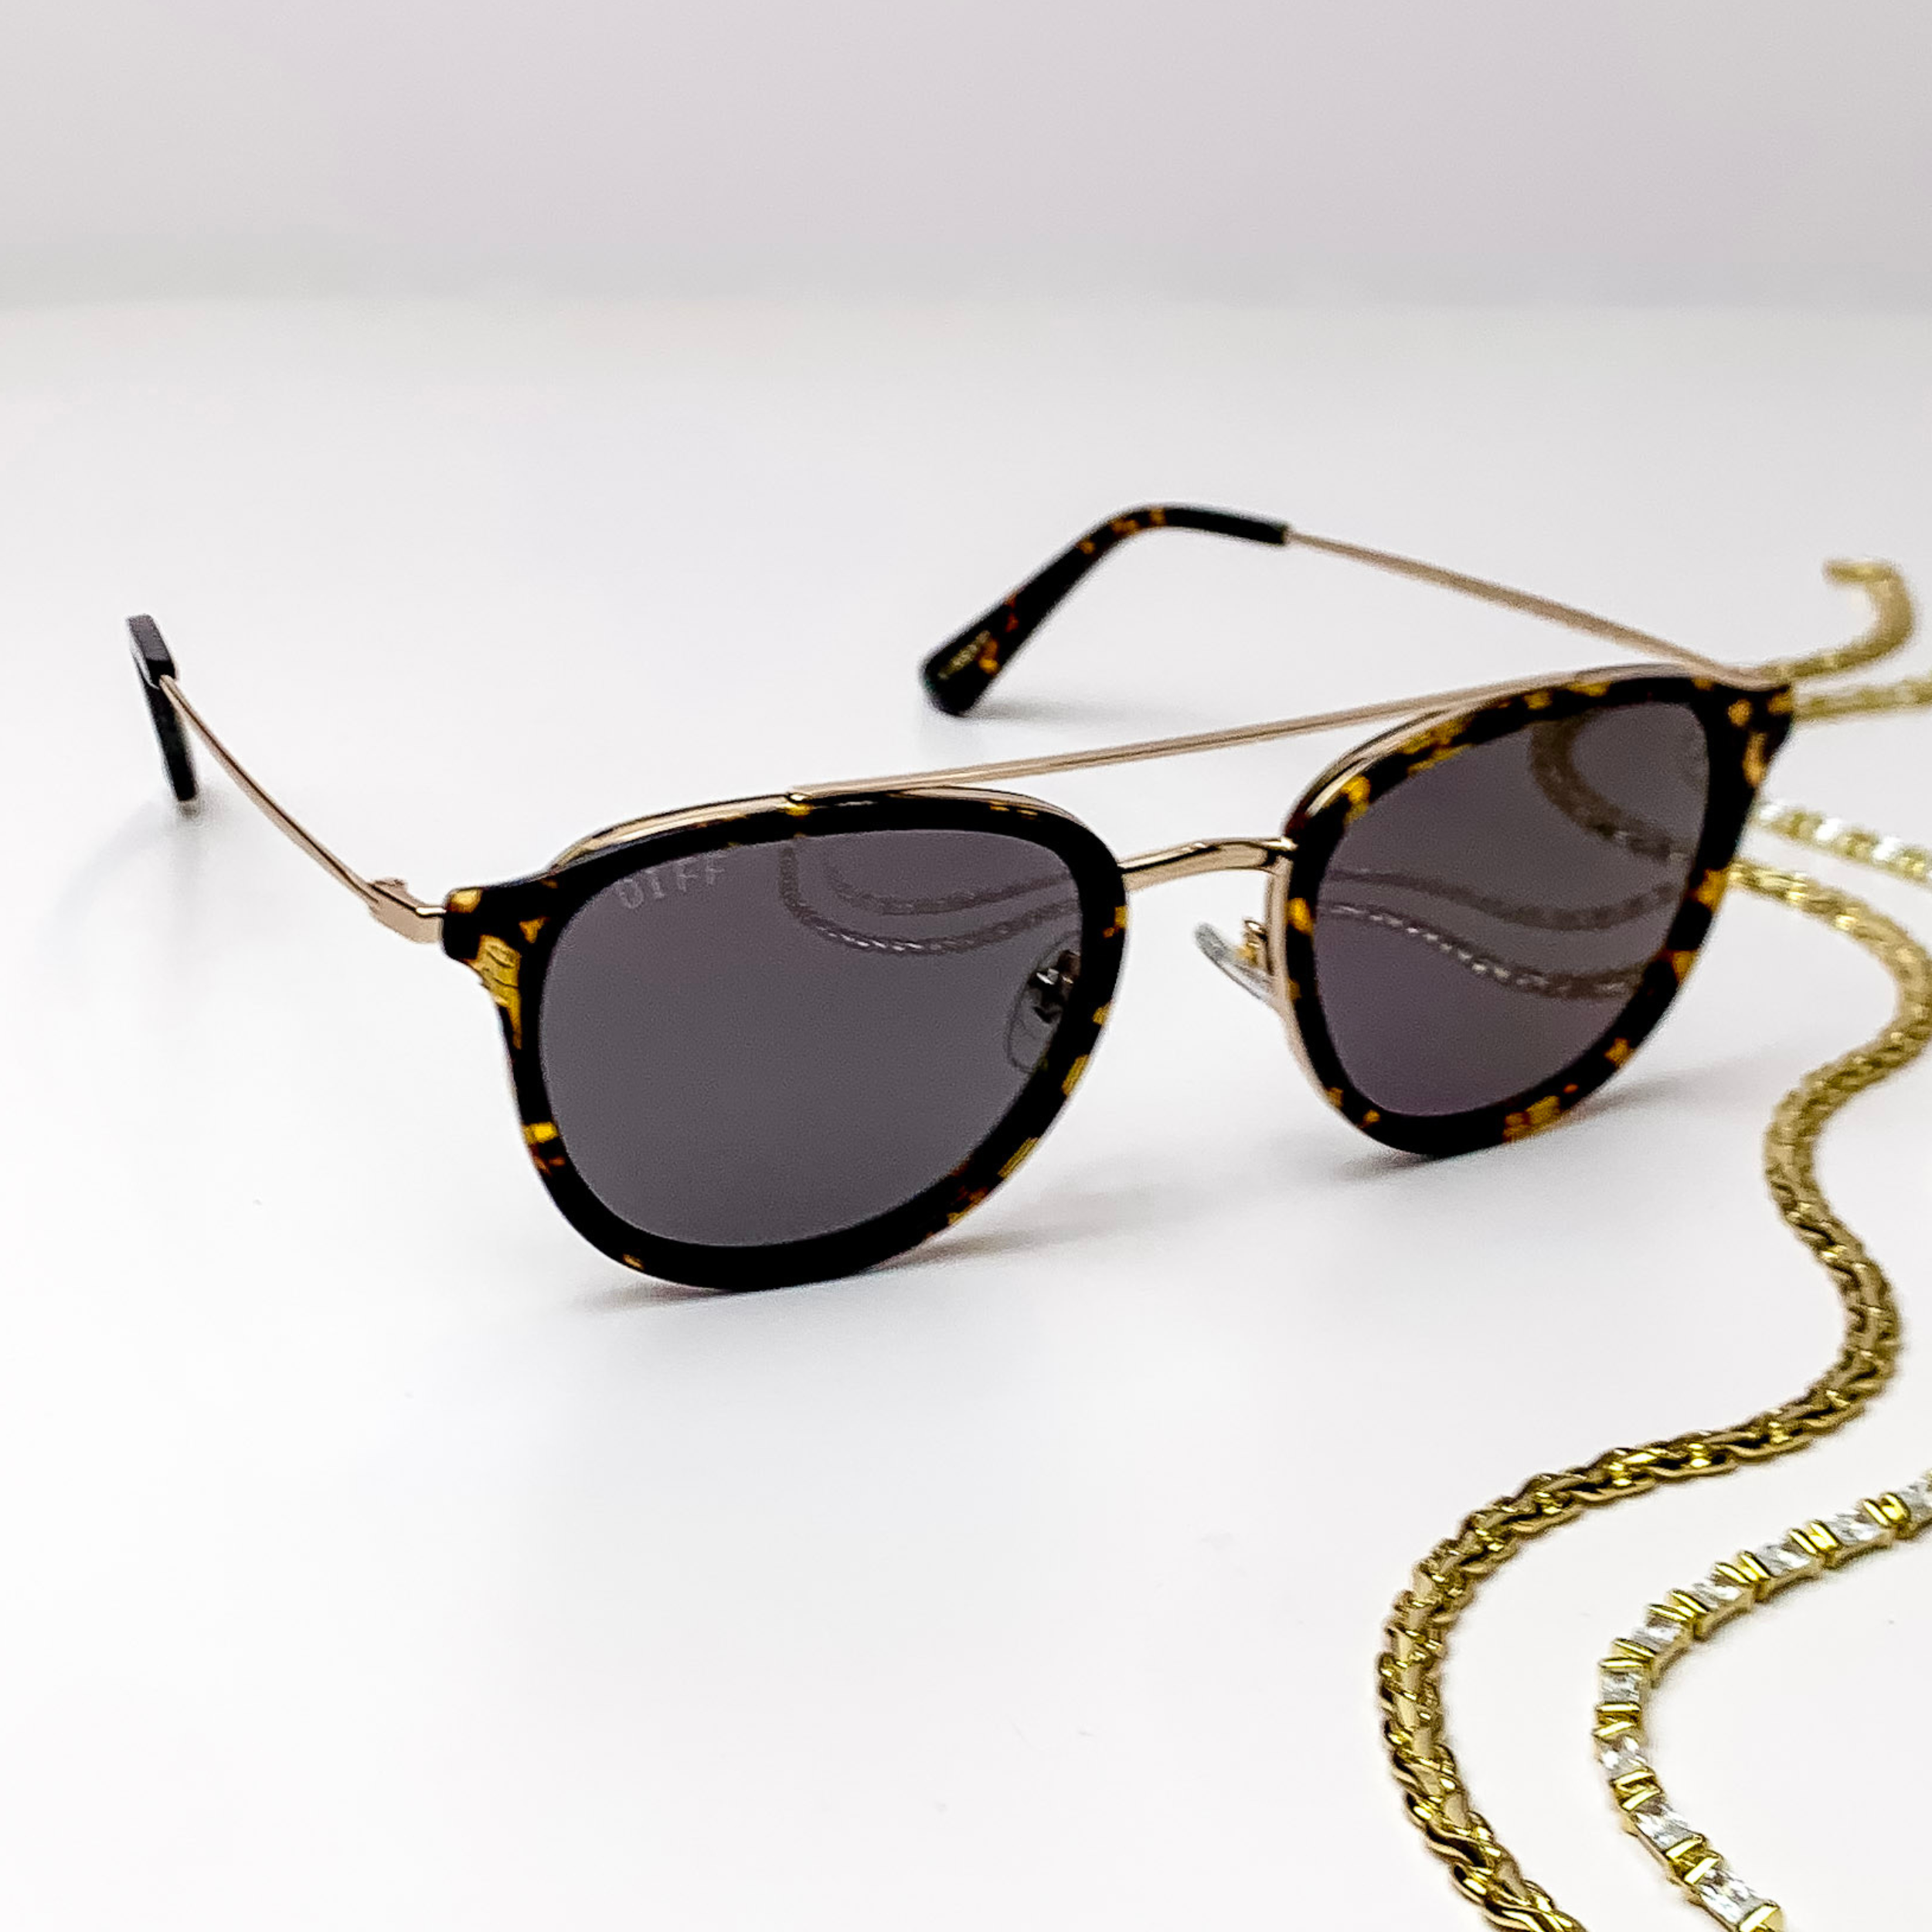 Aviator style gold glasses featuring a black frame with golden yellow spots and matching end pieces. Also features grey polarized lenses. 